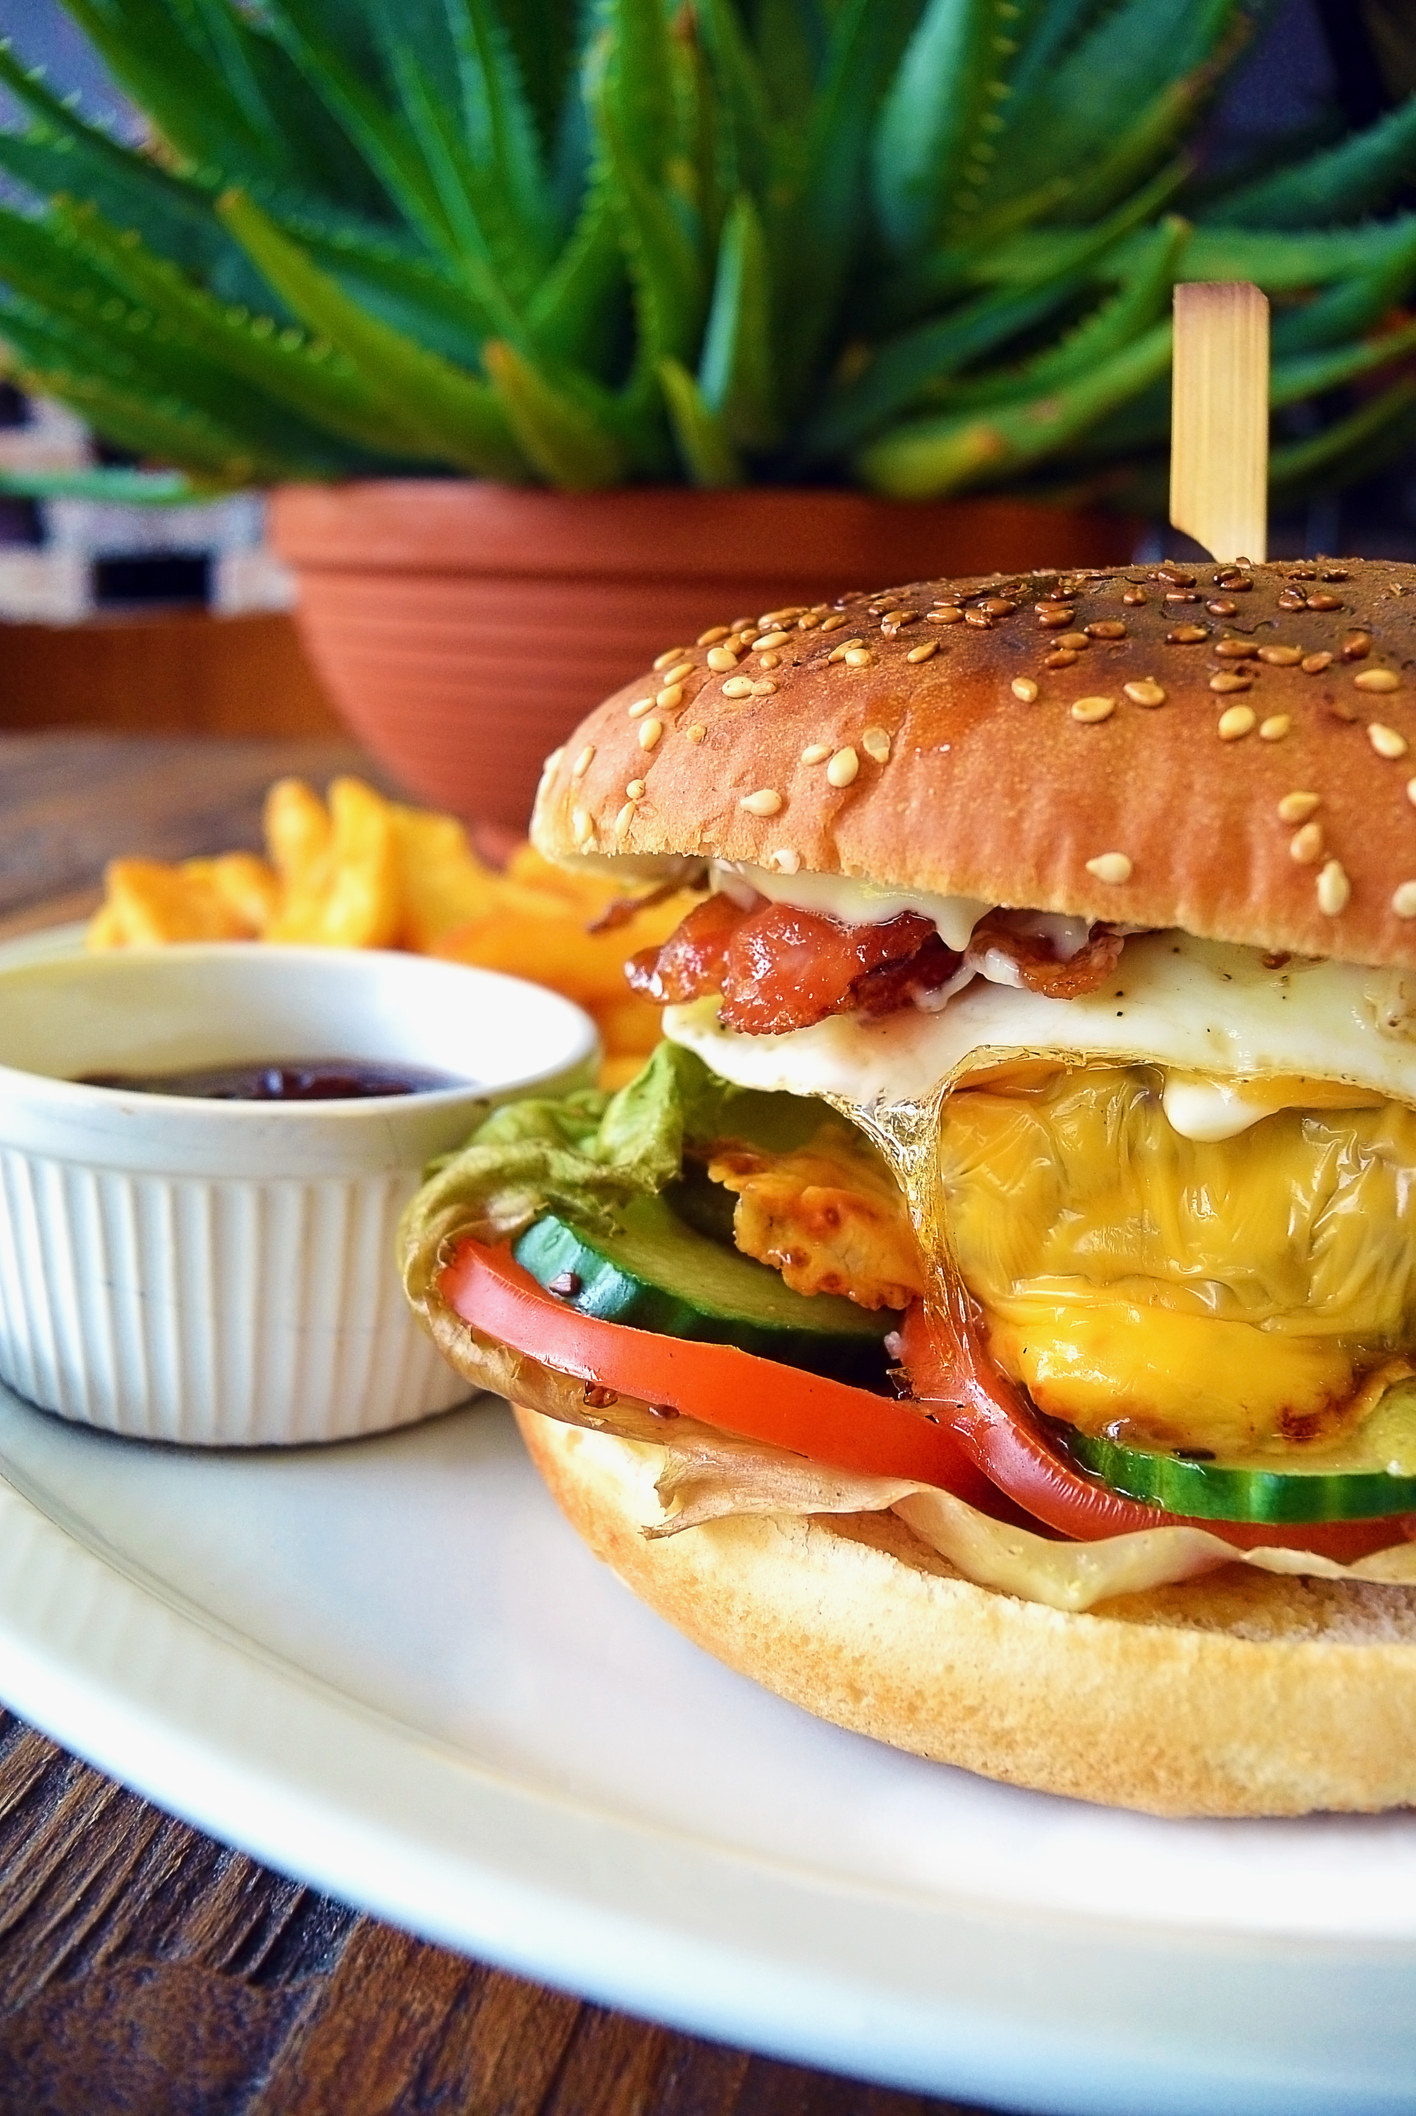 A hamburger with lots of toppings.